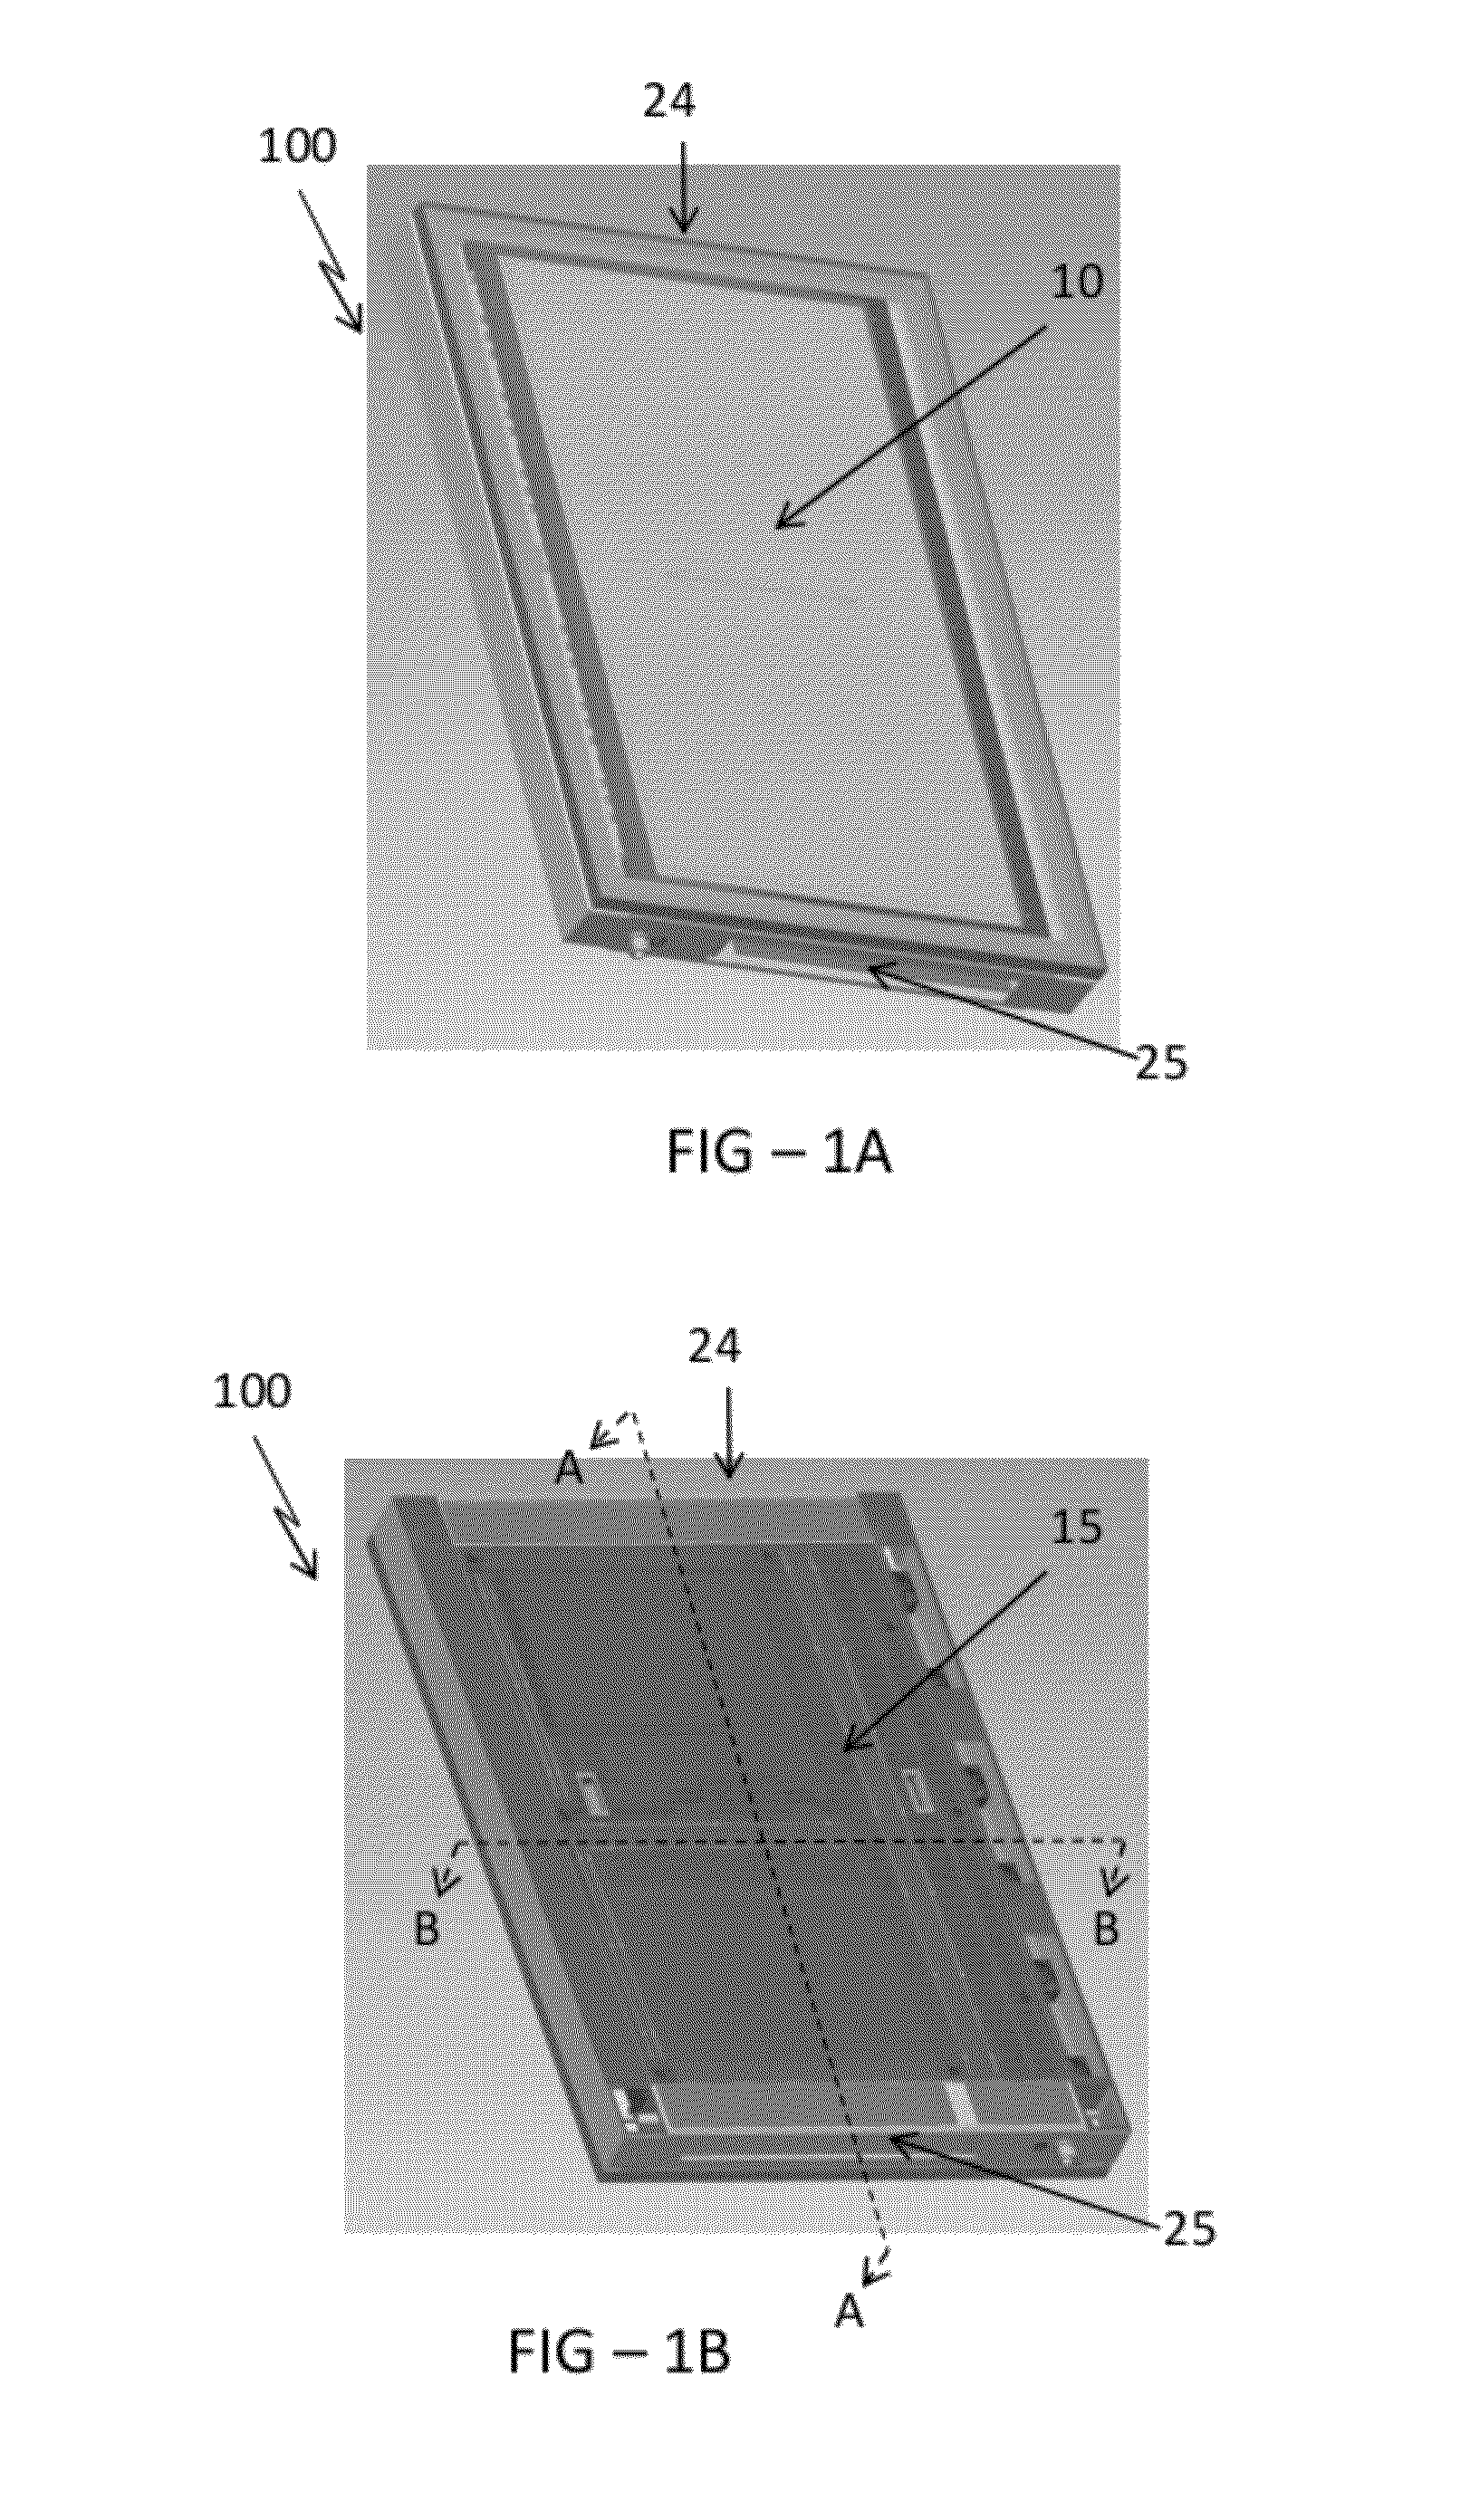 System and method for thermally controlling an electronic display with reduced noise emissions